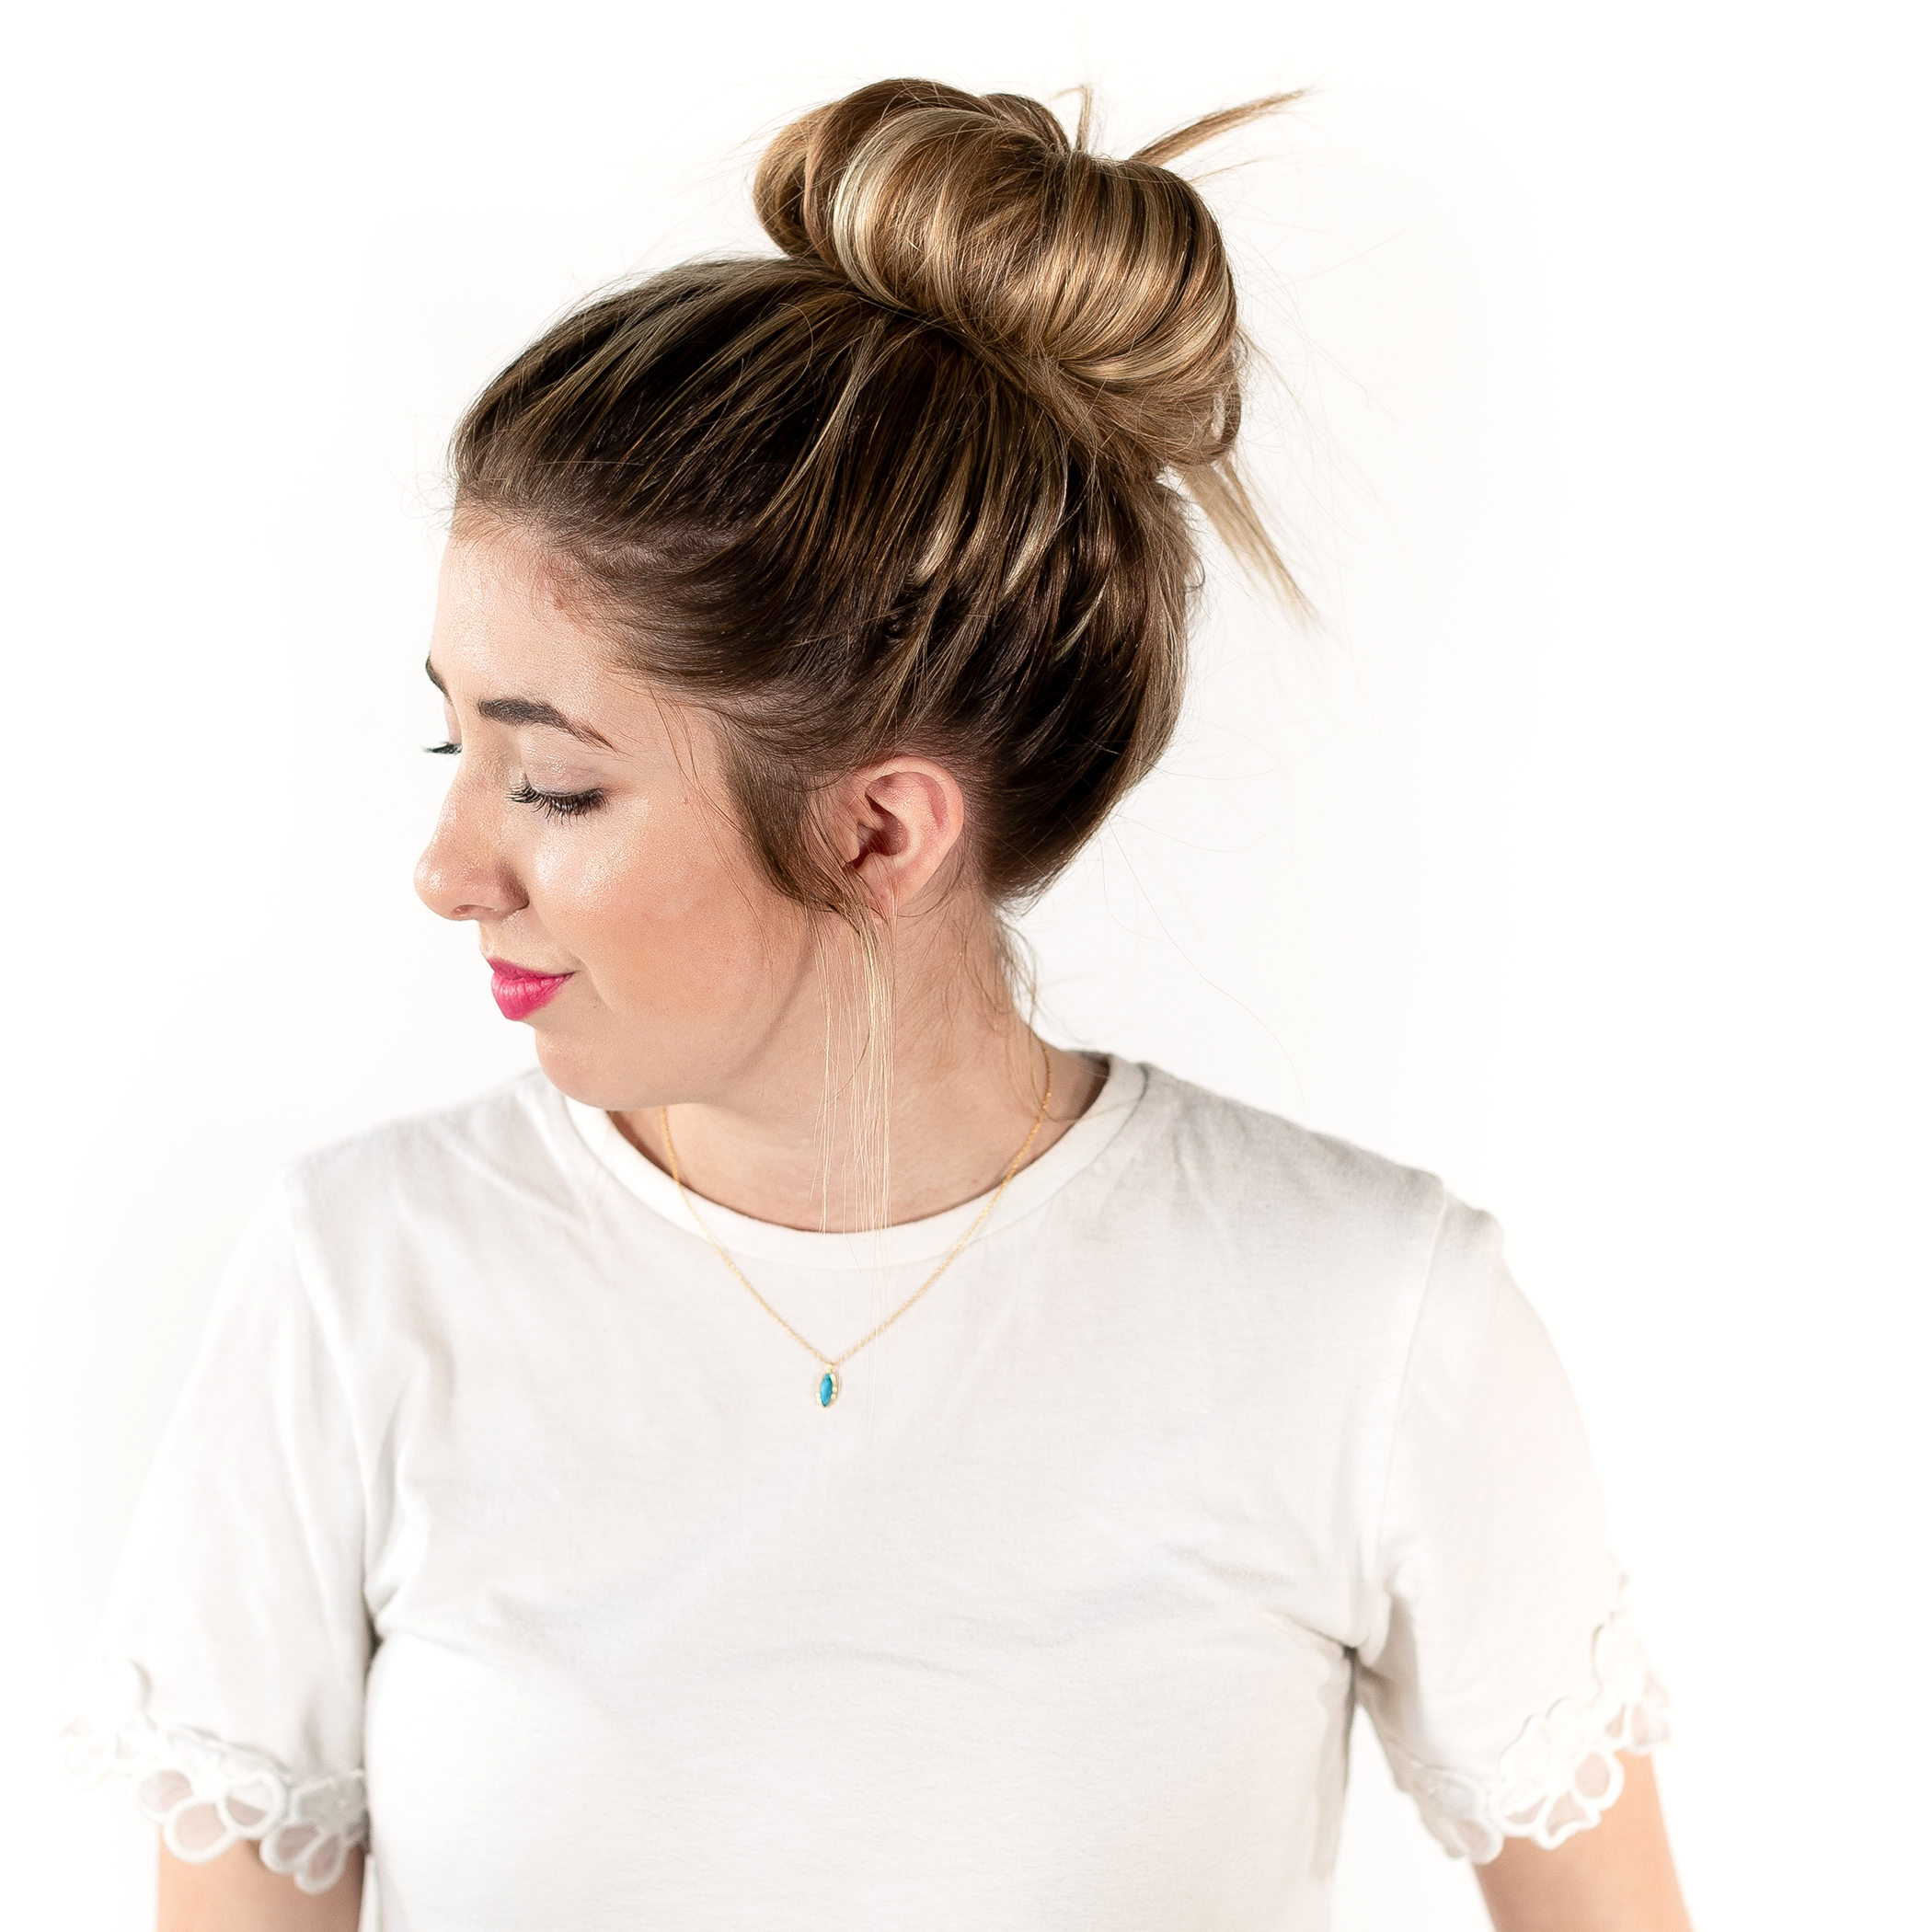 Two Minute Tuesday: Top Knot